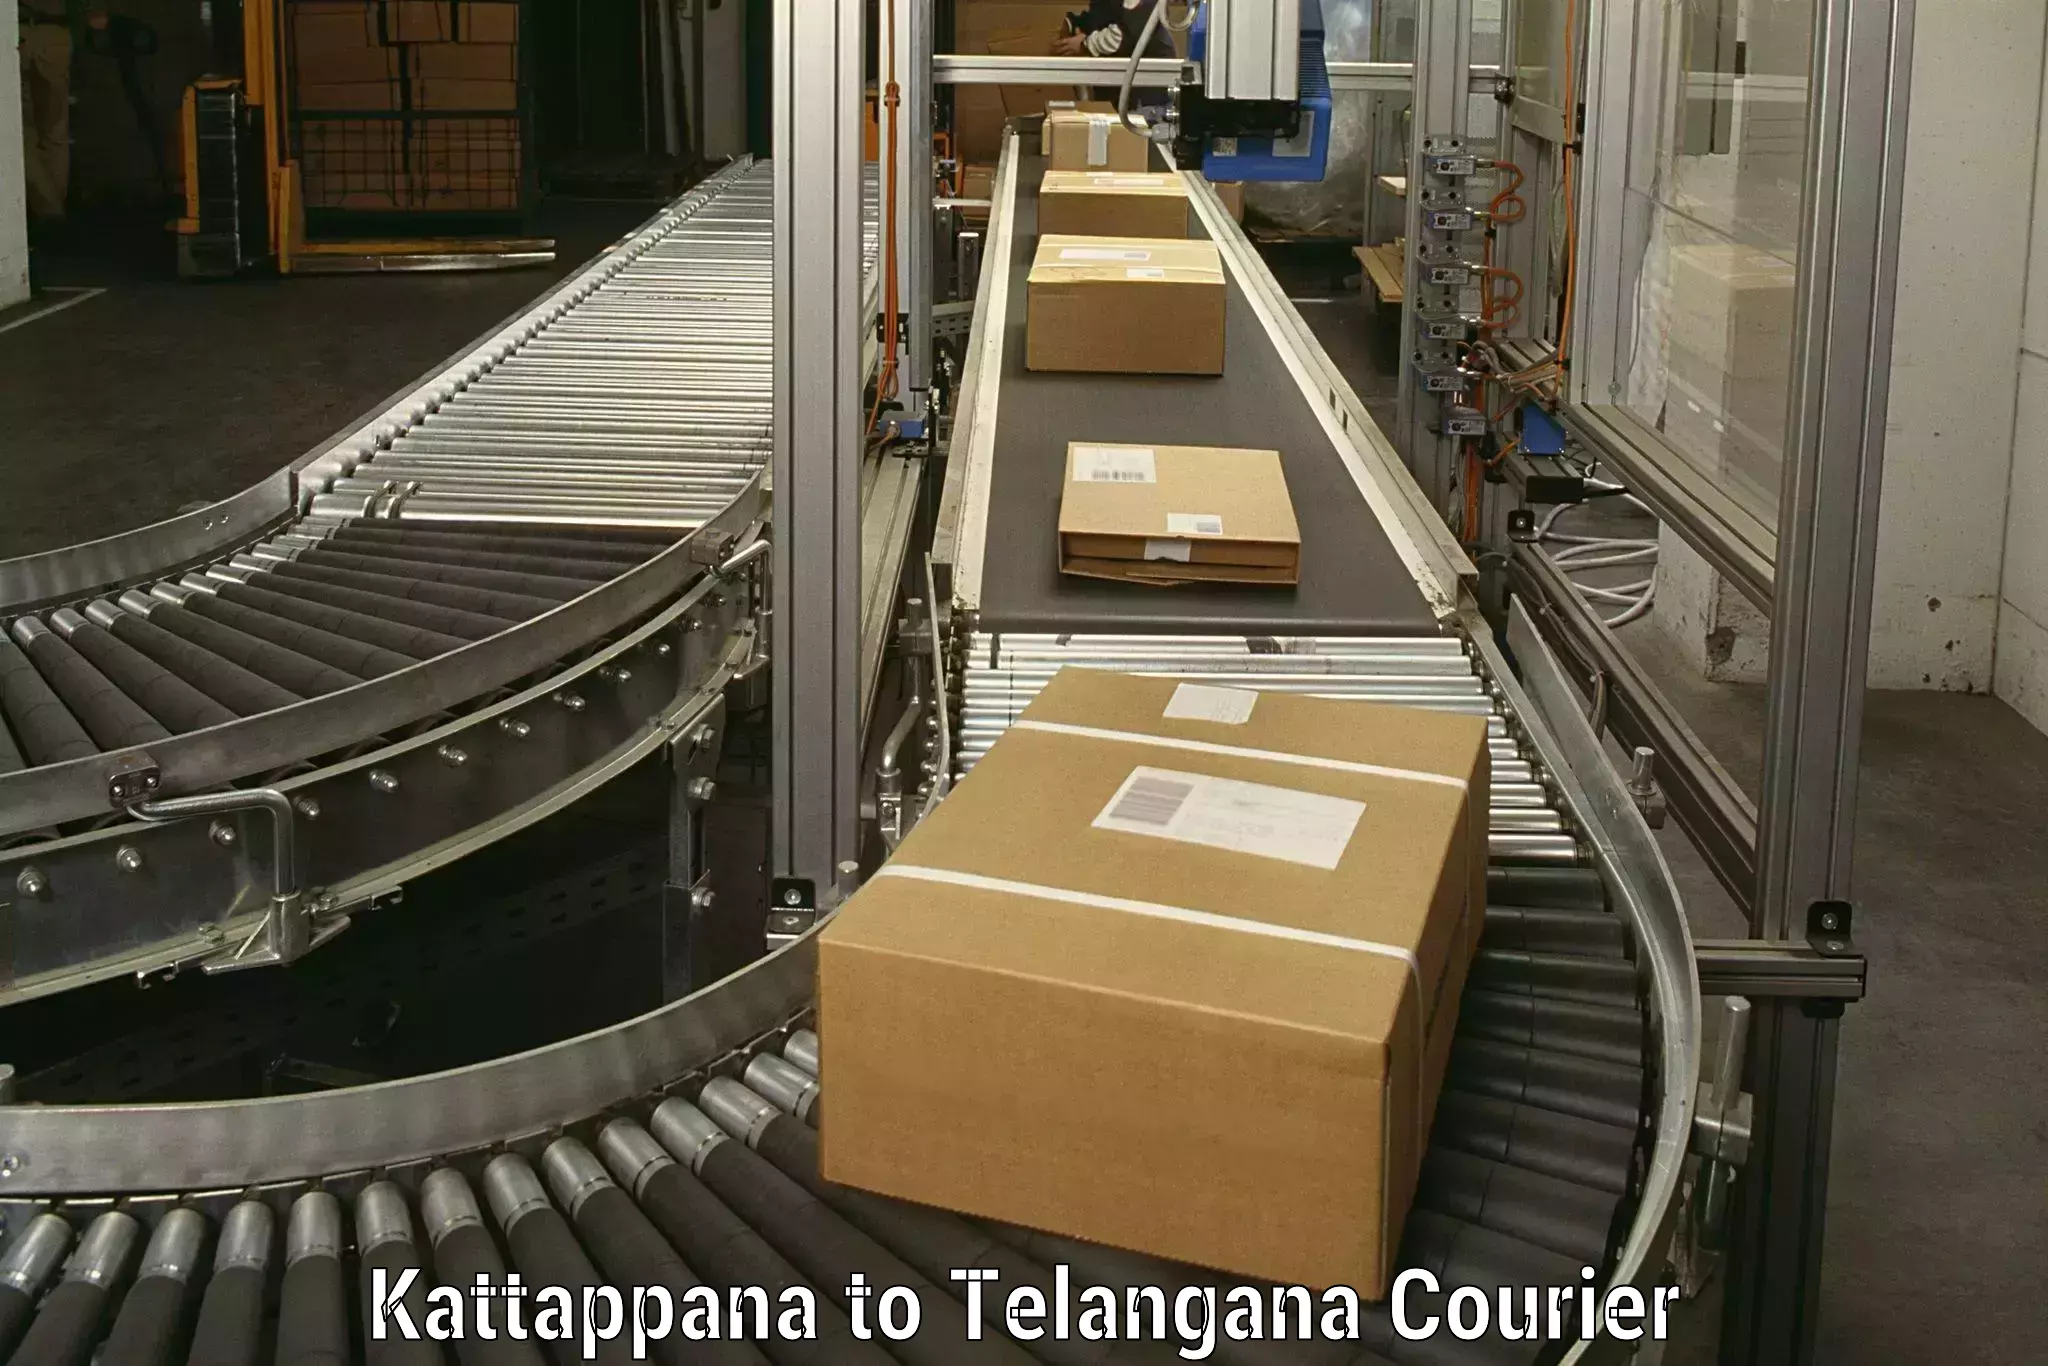 Quality relocation assistance in Kattappana to Secunderabad